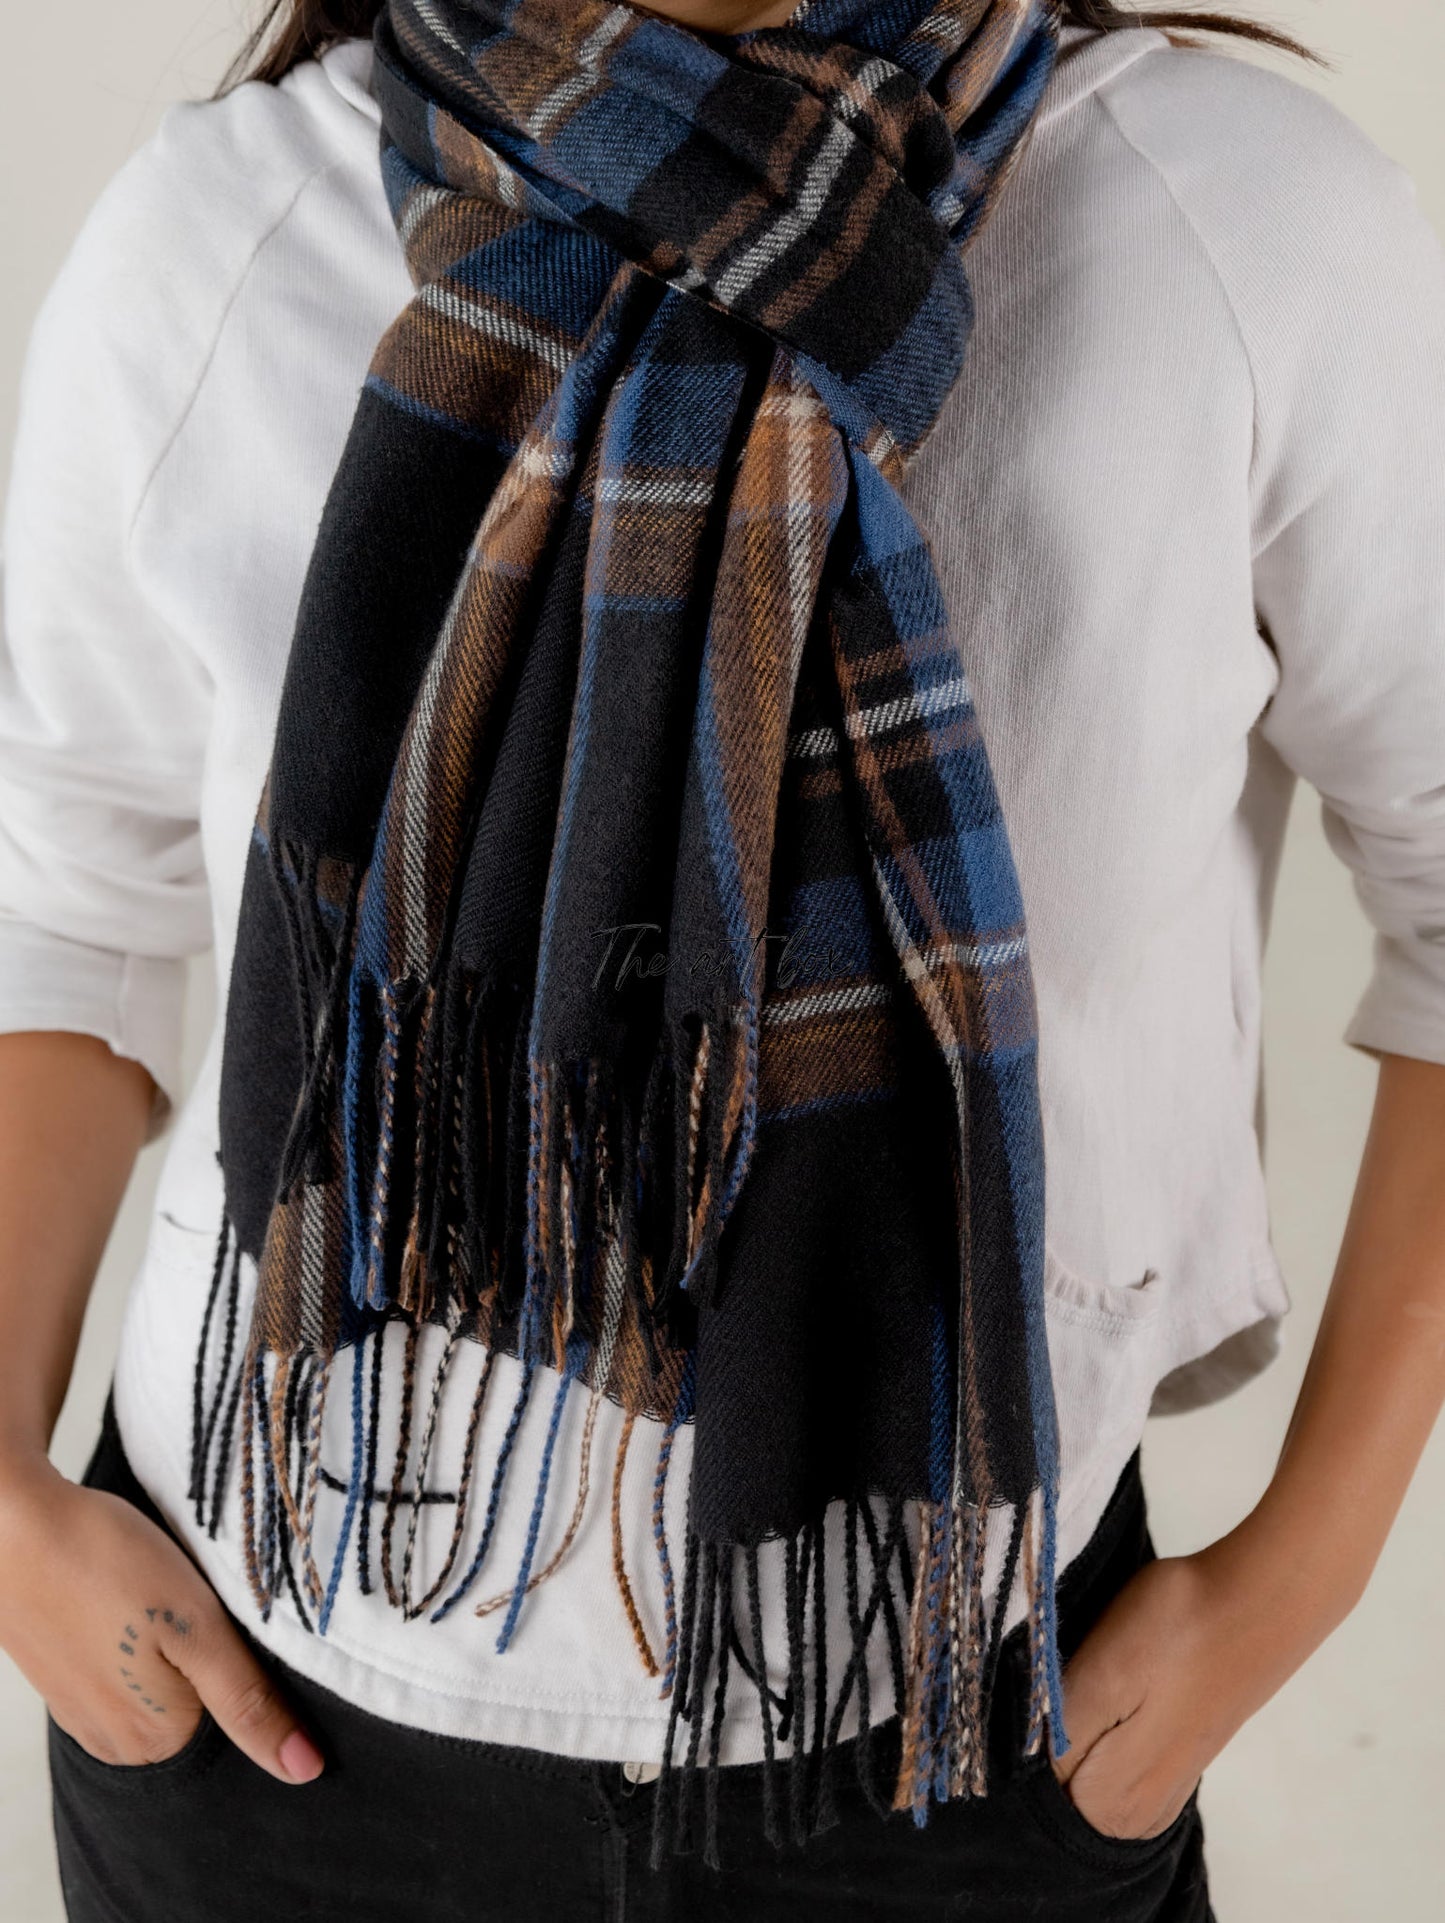 Soft and Stylish: Cotton Woolen Scarves You'll Adore